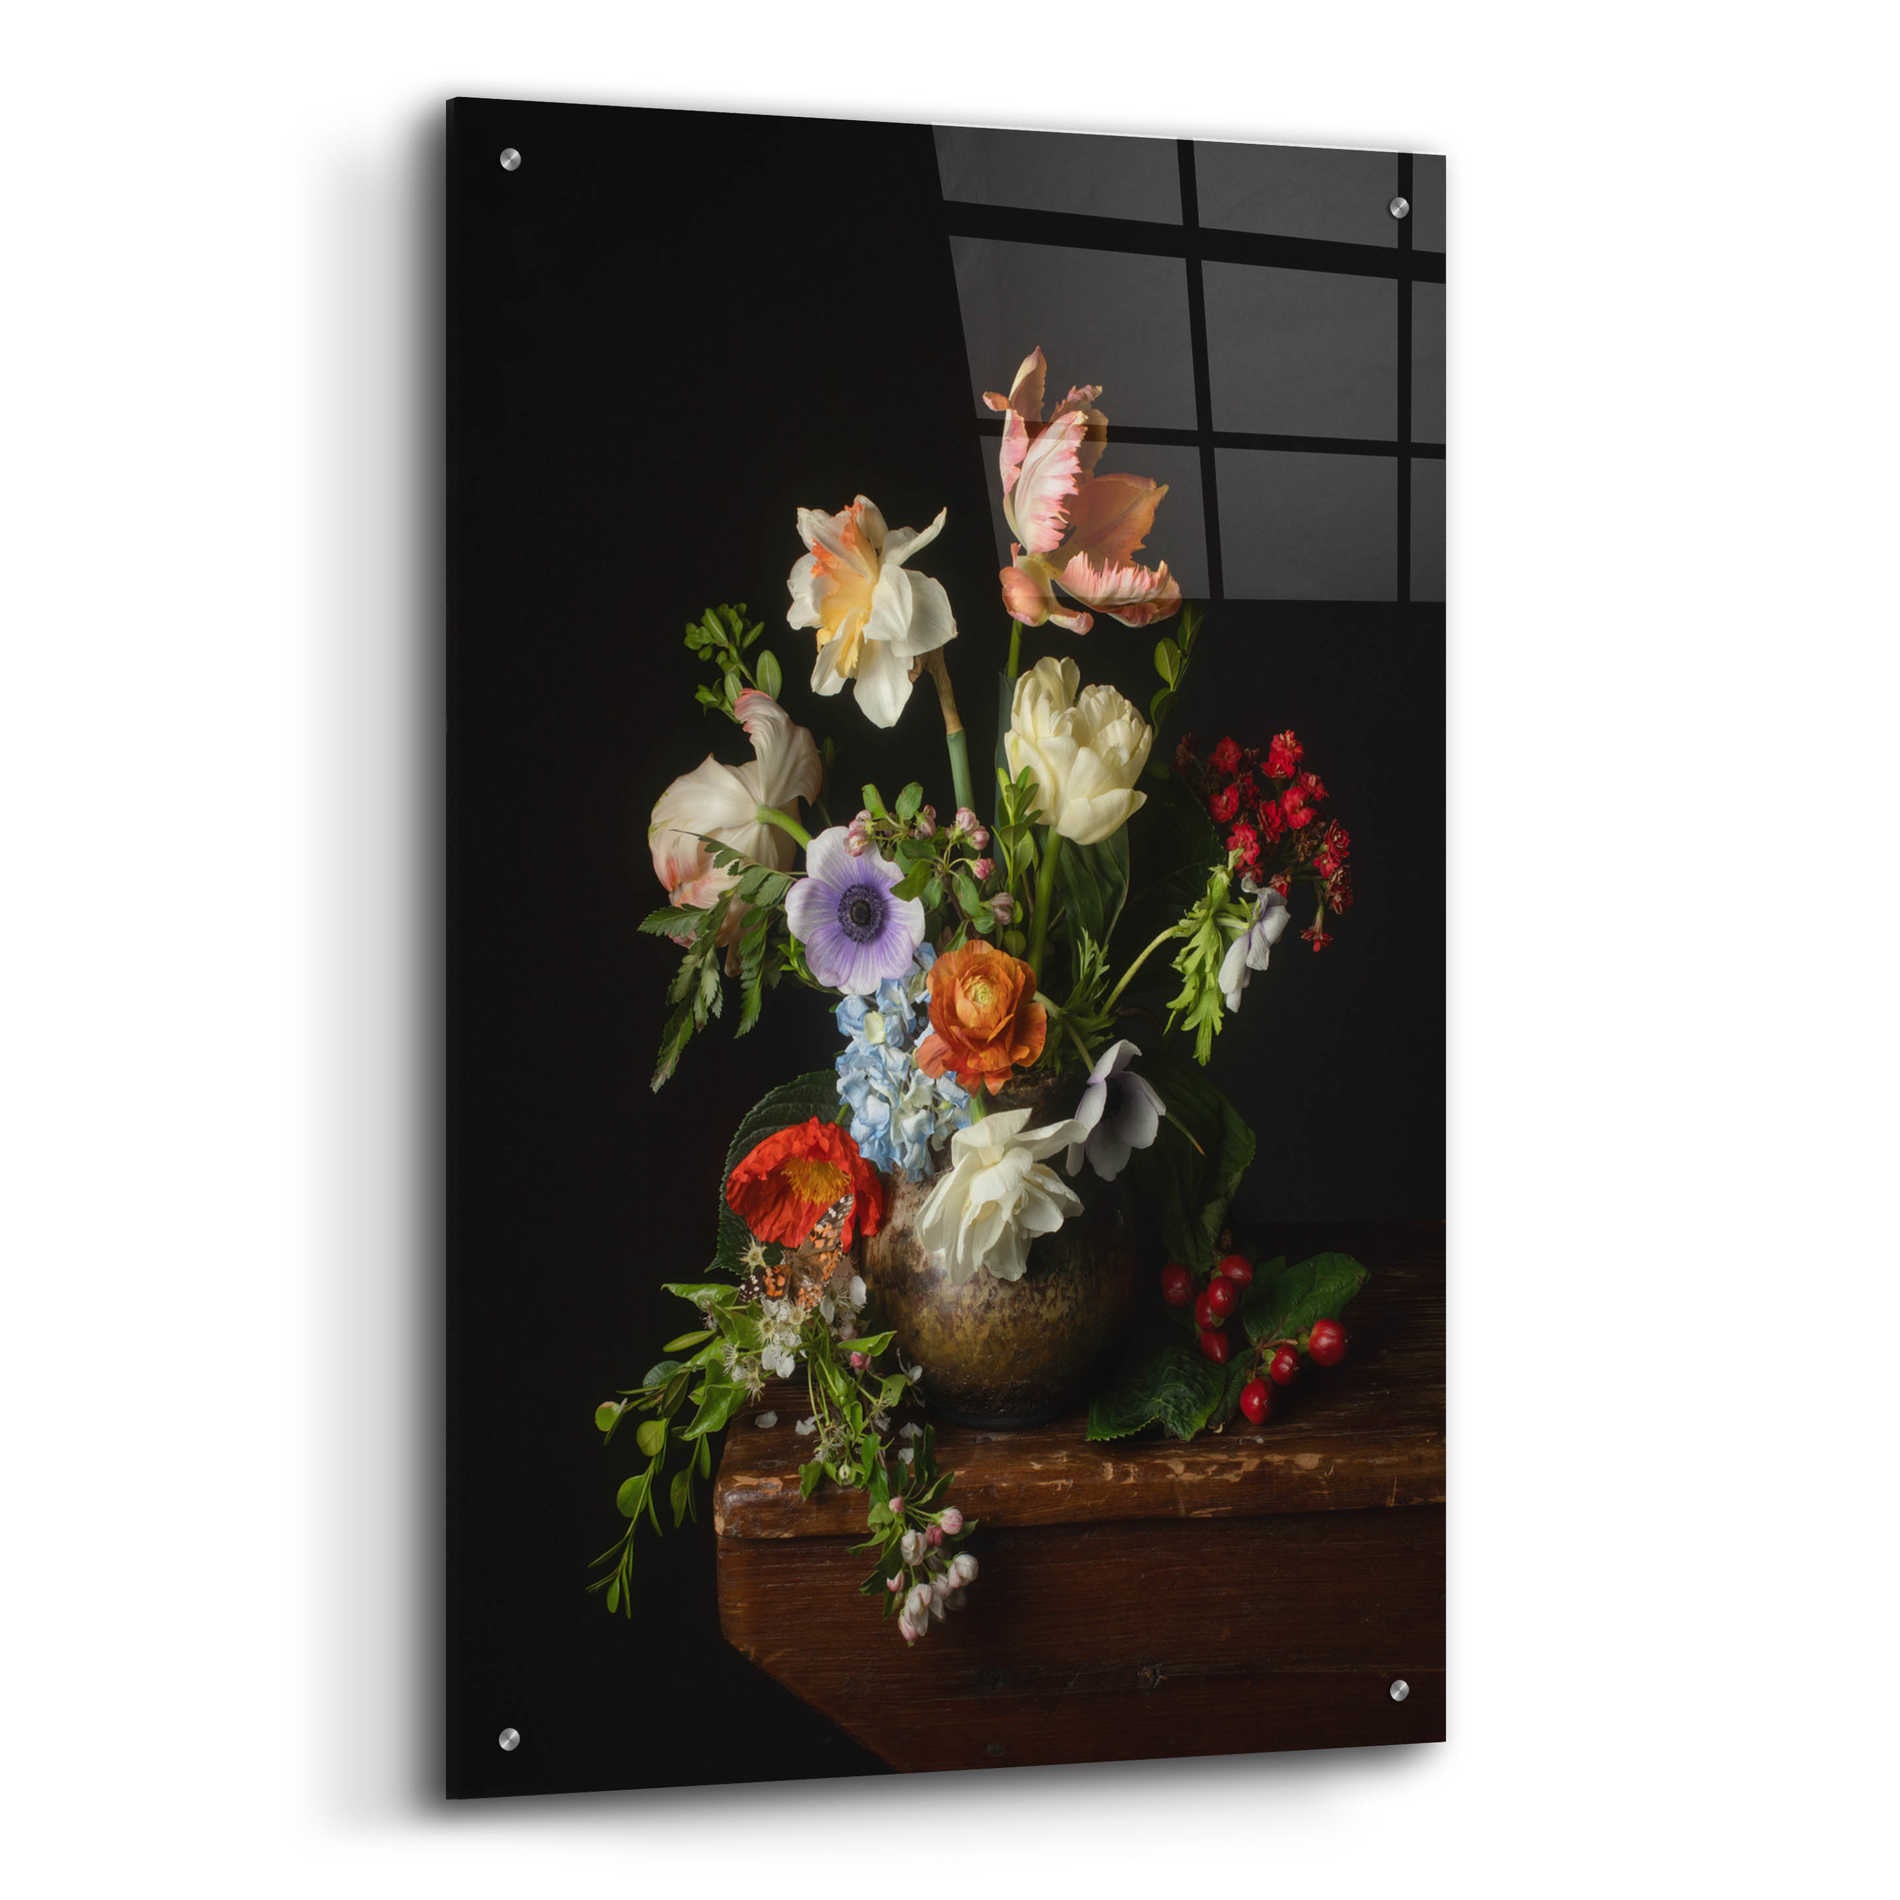 Epic Art 'A Bounty Of Spring Blooms' by Leah McLean Acrylic Glass Wall Art,24x36